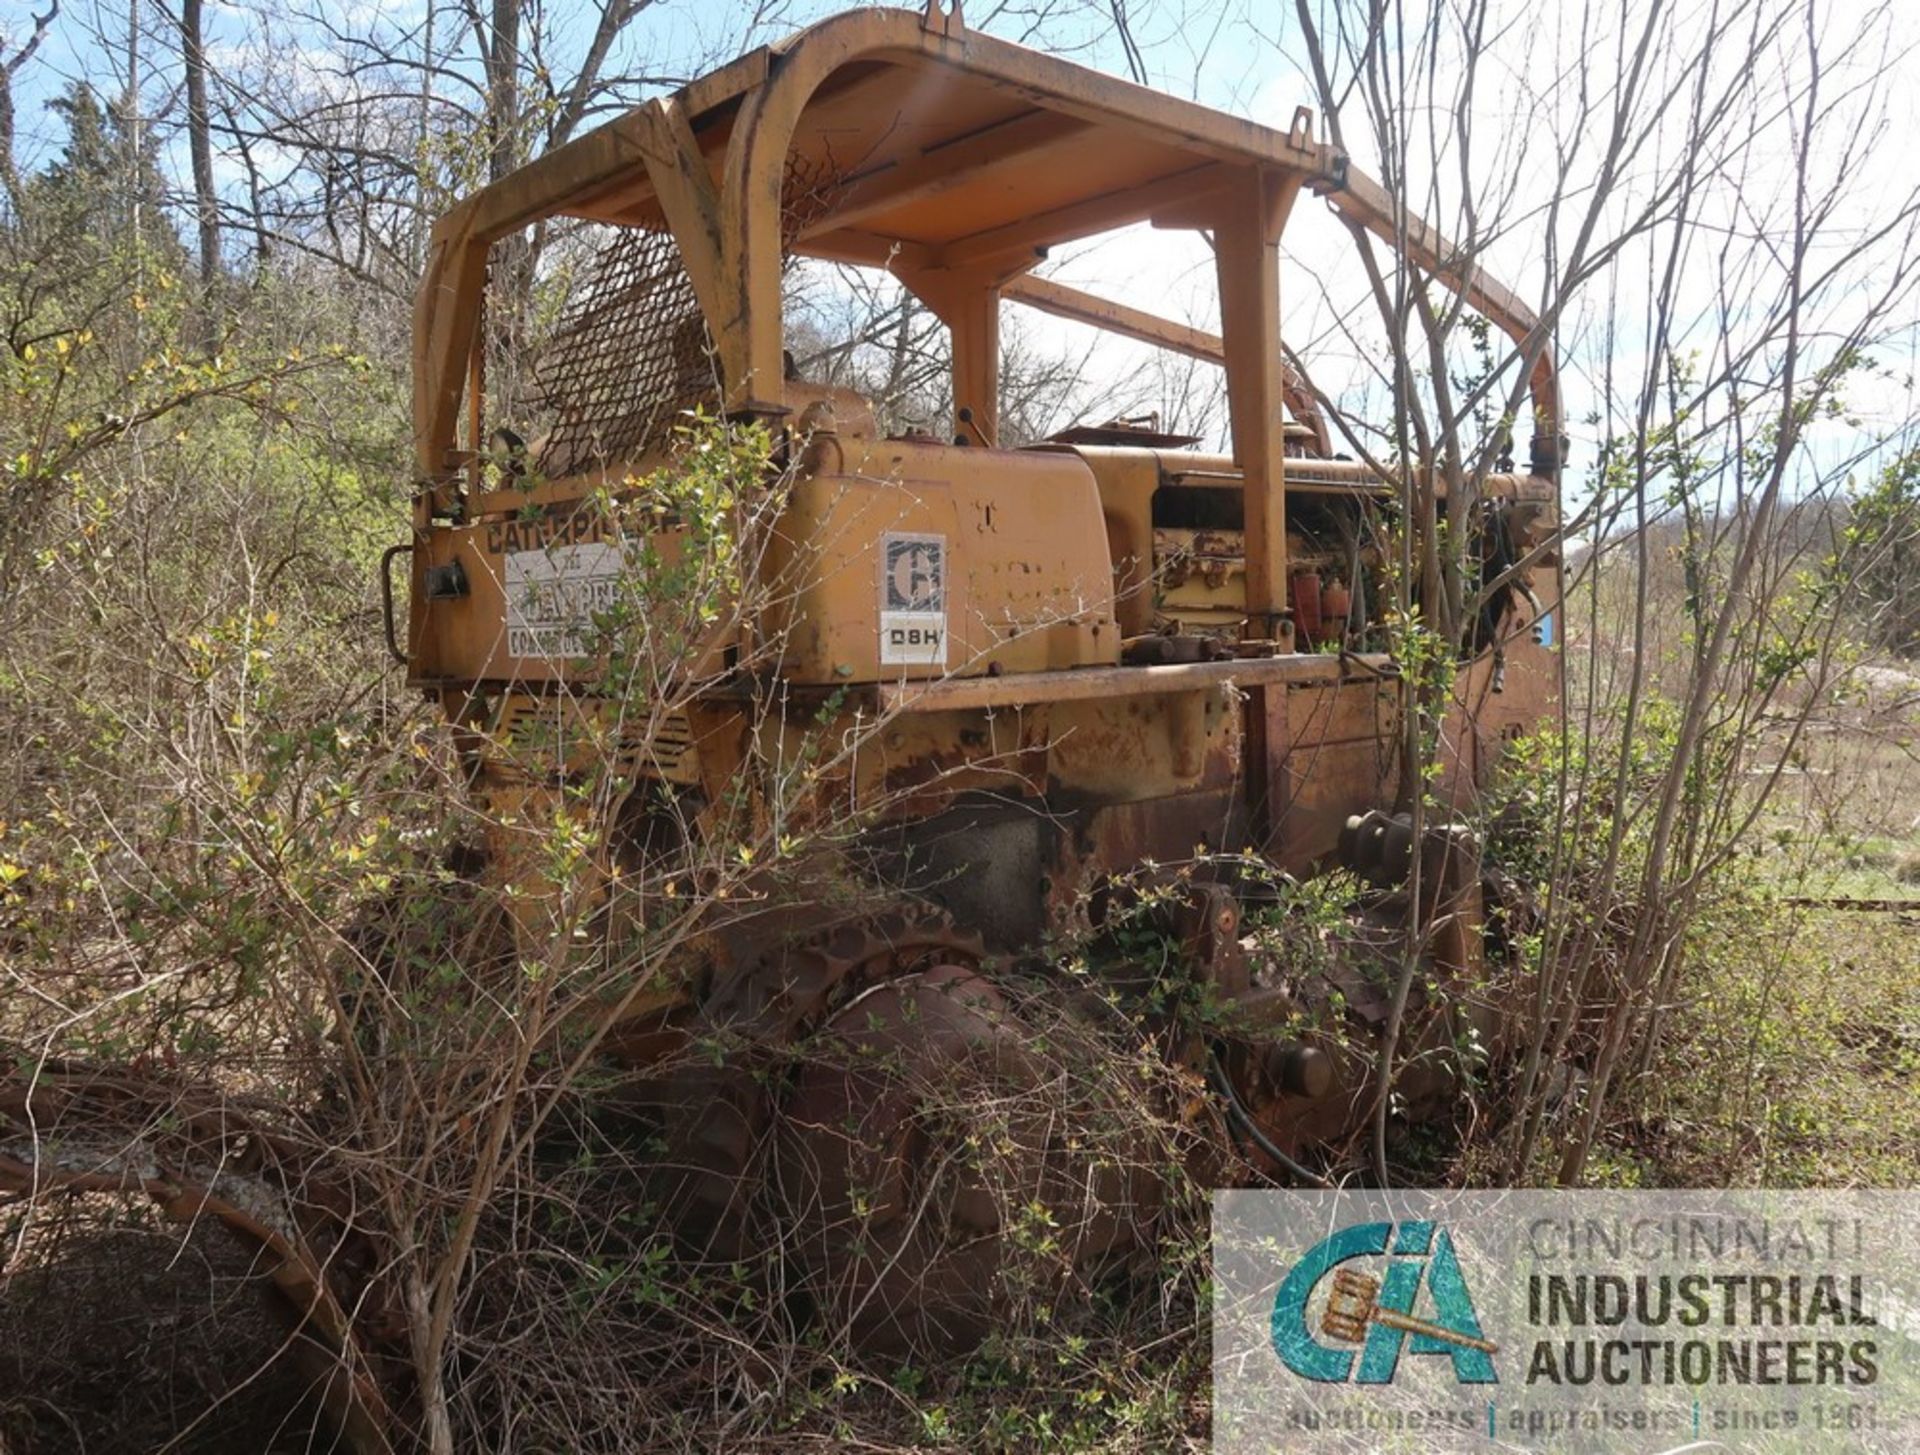 CATERPILLAR MODEL D8H PARTED-OUT CRAWLER DOZIER; S/N N/A, PARTS ONLY DOZIER **LOCATED AT 900 LICKING - Image 2 of 5